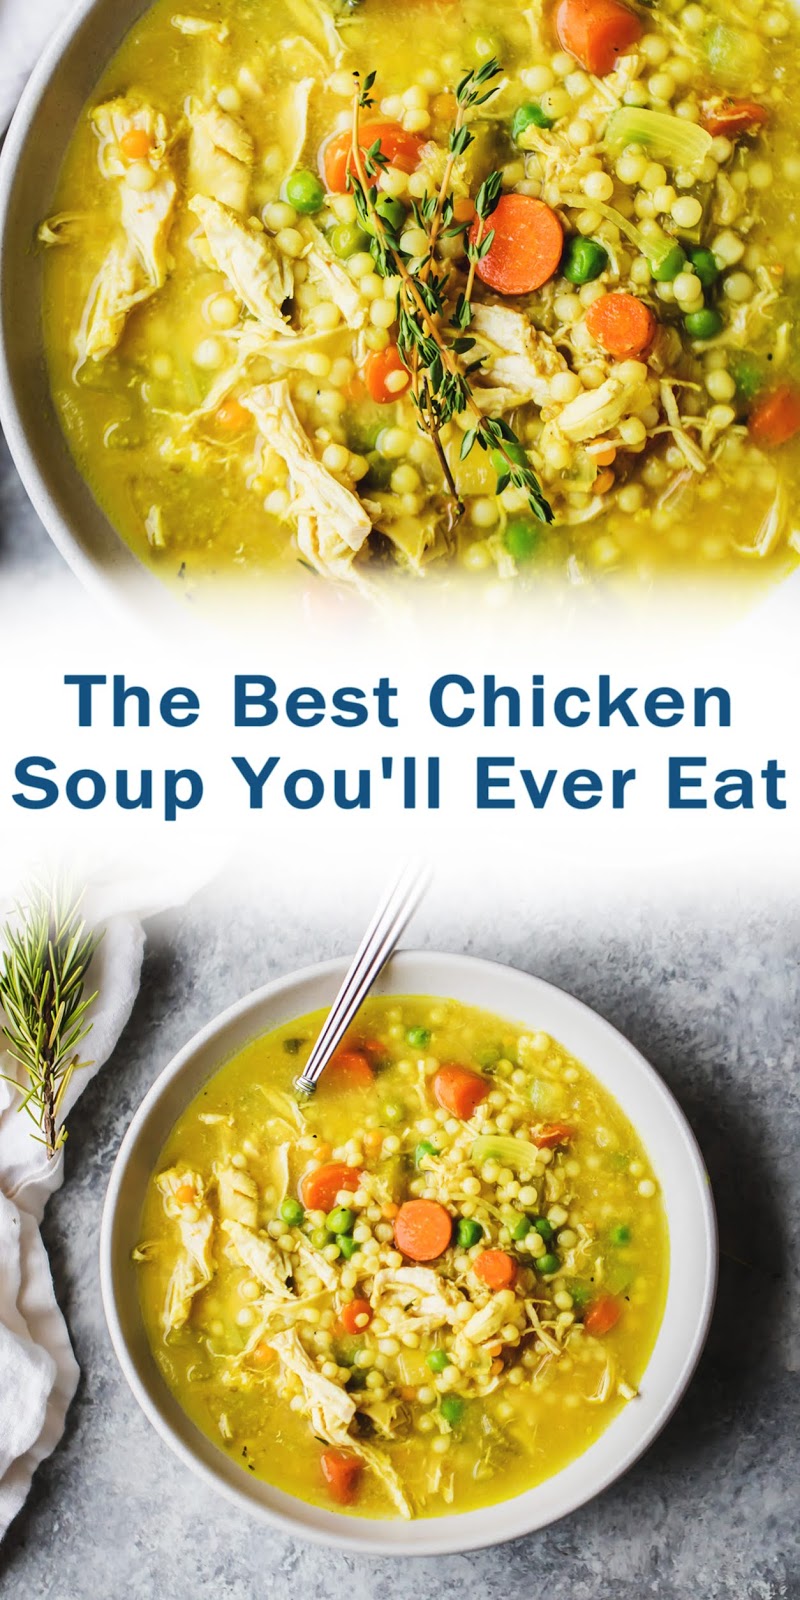 The Best Chicken Soup You'll Ever Eat